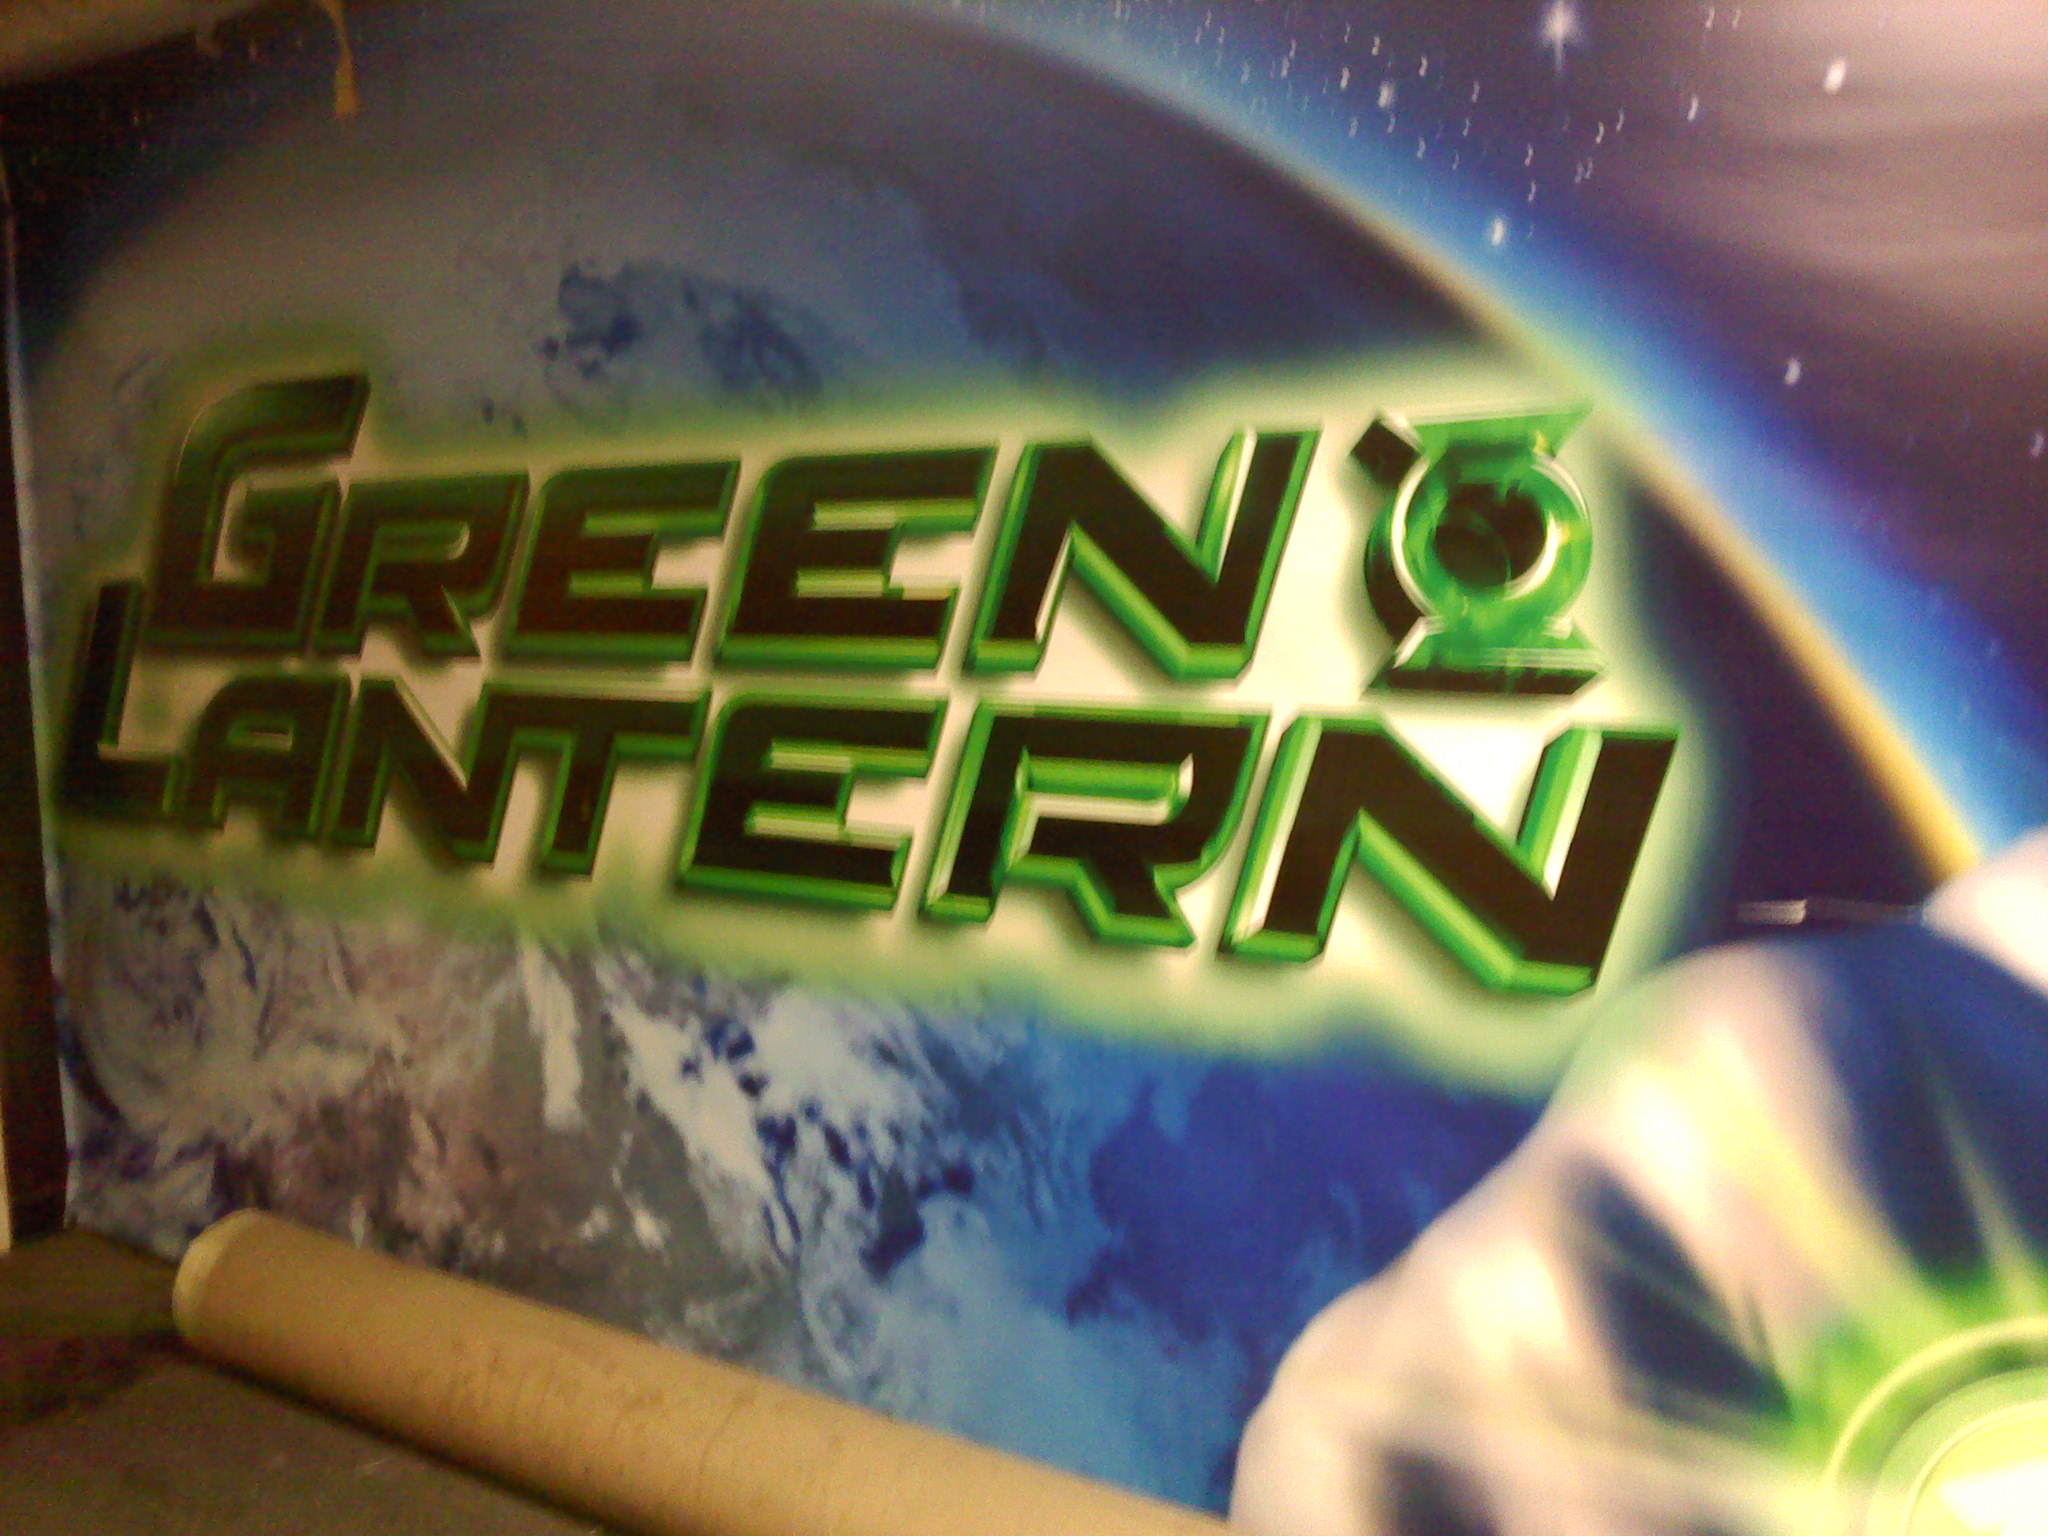  A large Green Lantern display spotted at the Warner Bros. lot by a reader at Bleeding Cool.